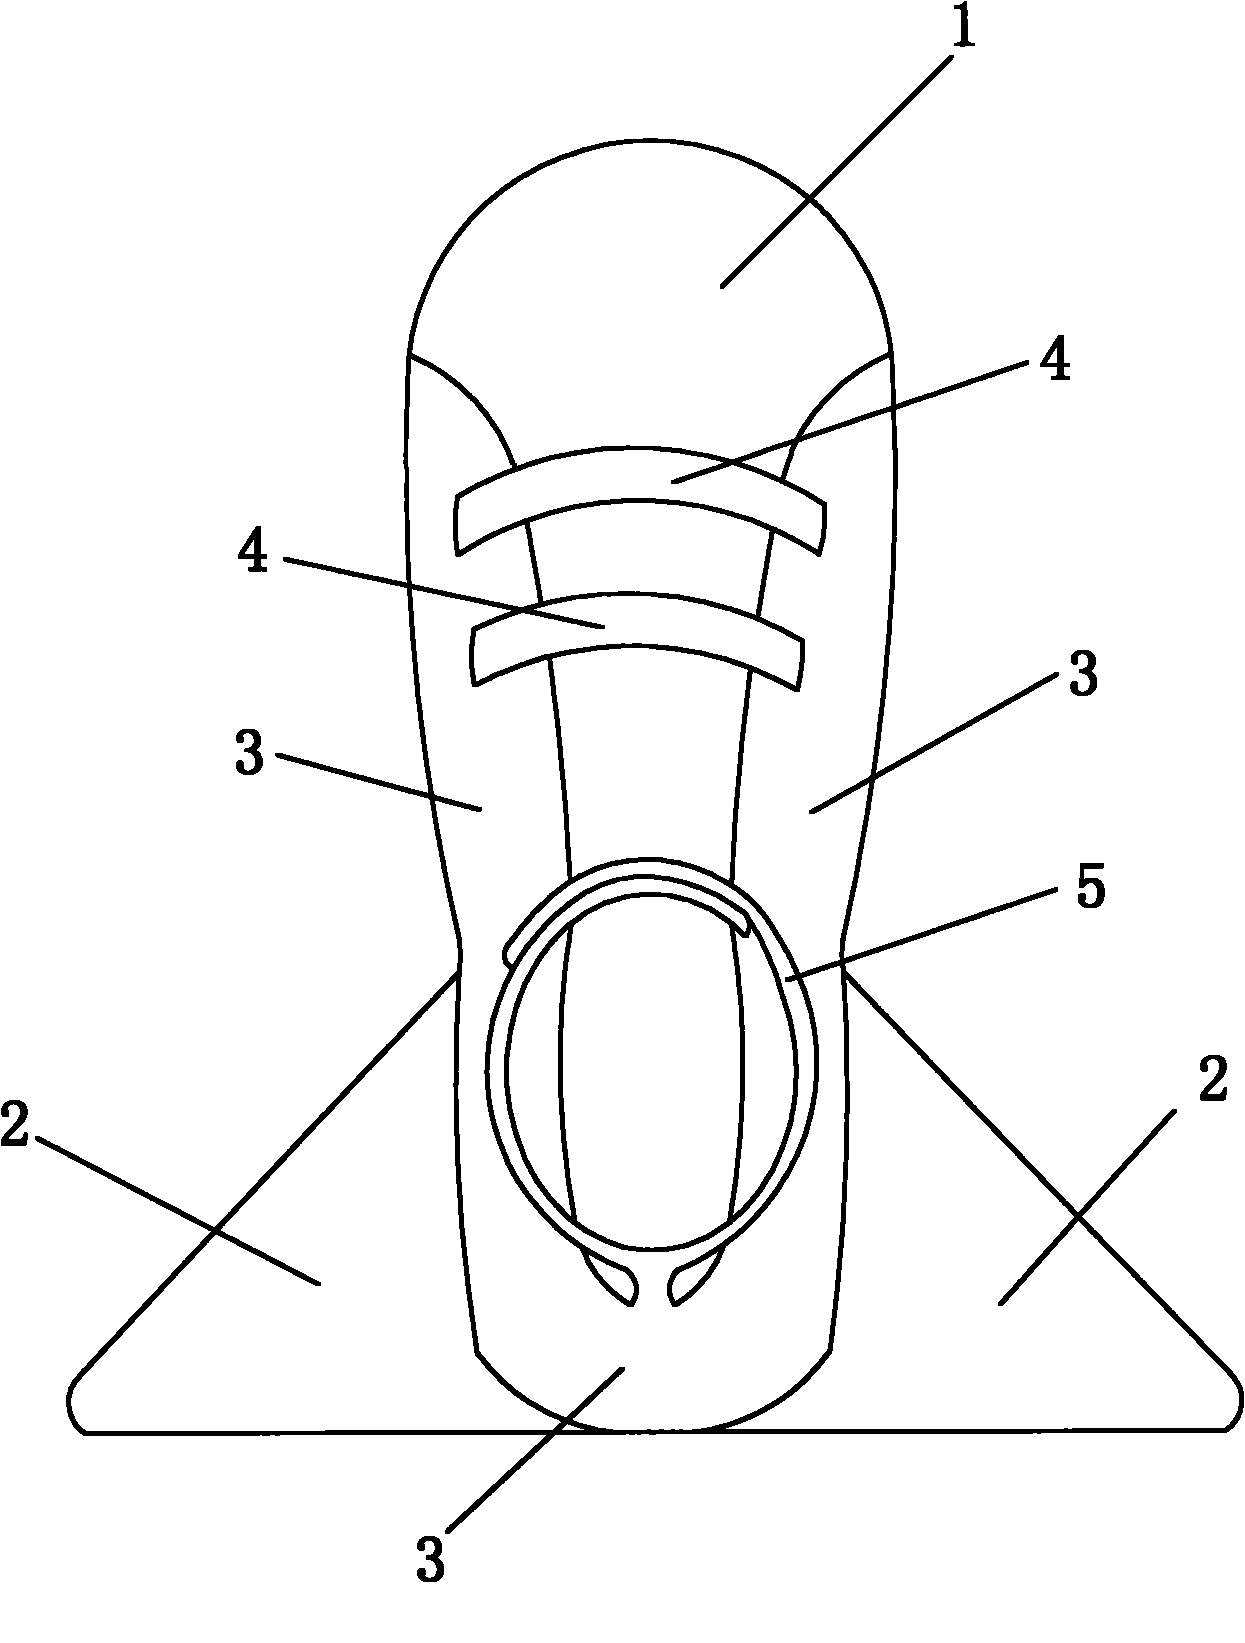 Improvement of ant-rotating shoes